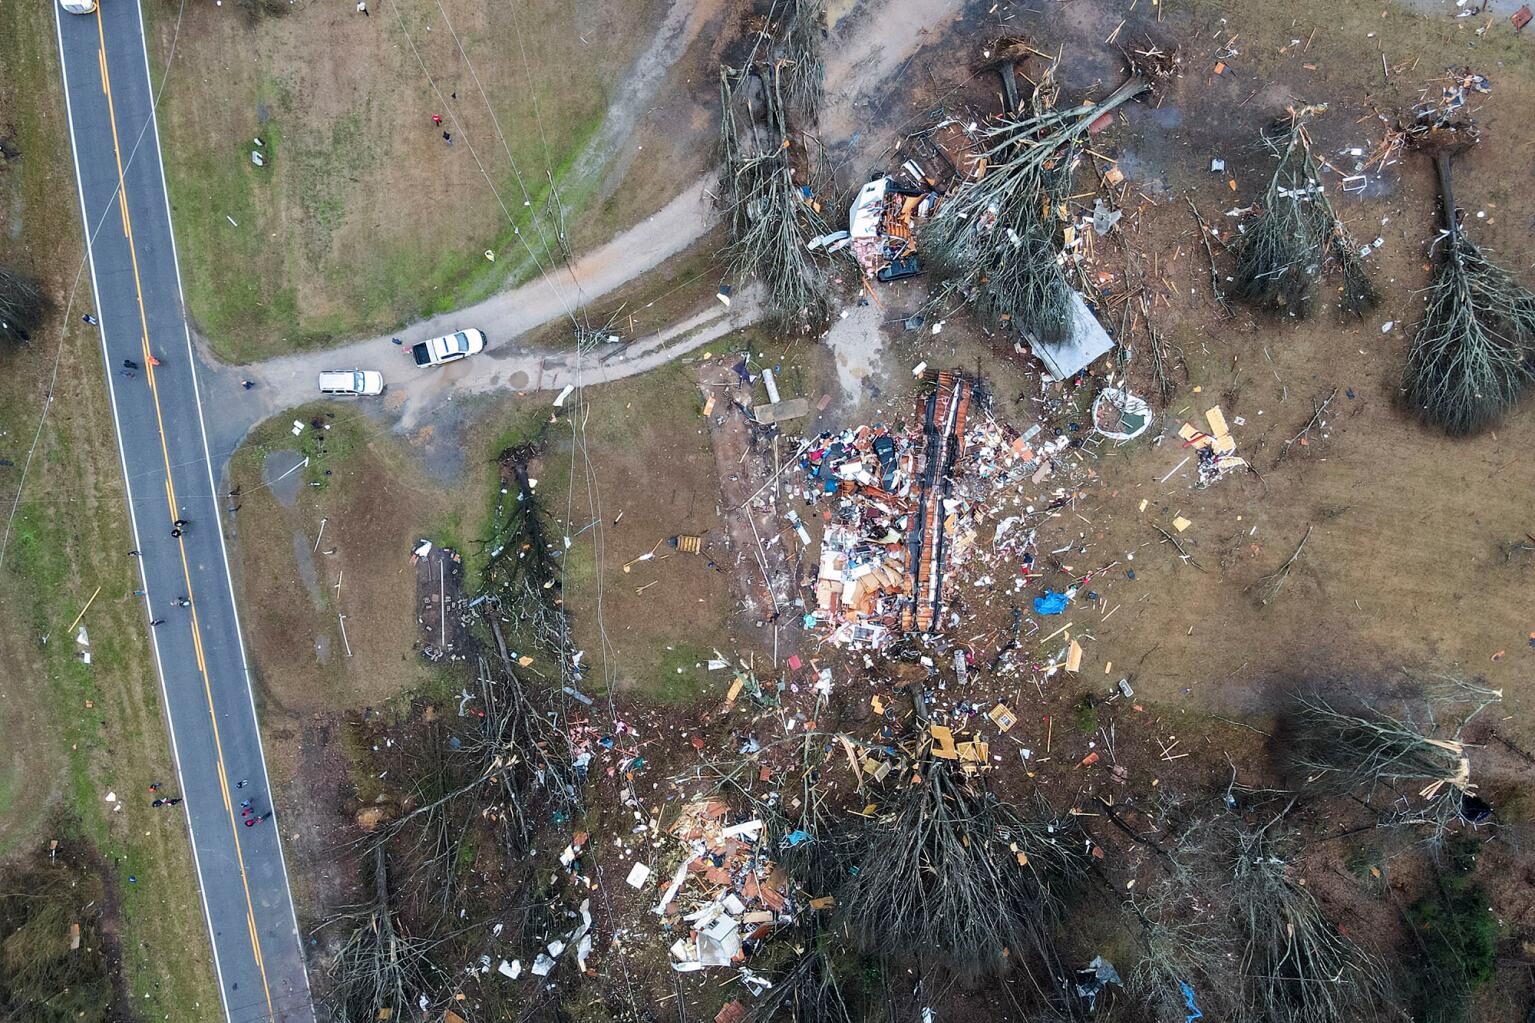 Devastation in the aftermath of severe weather in Greensboro, Alabama.